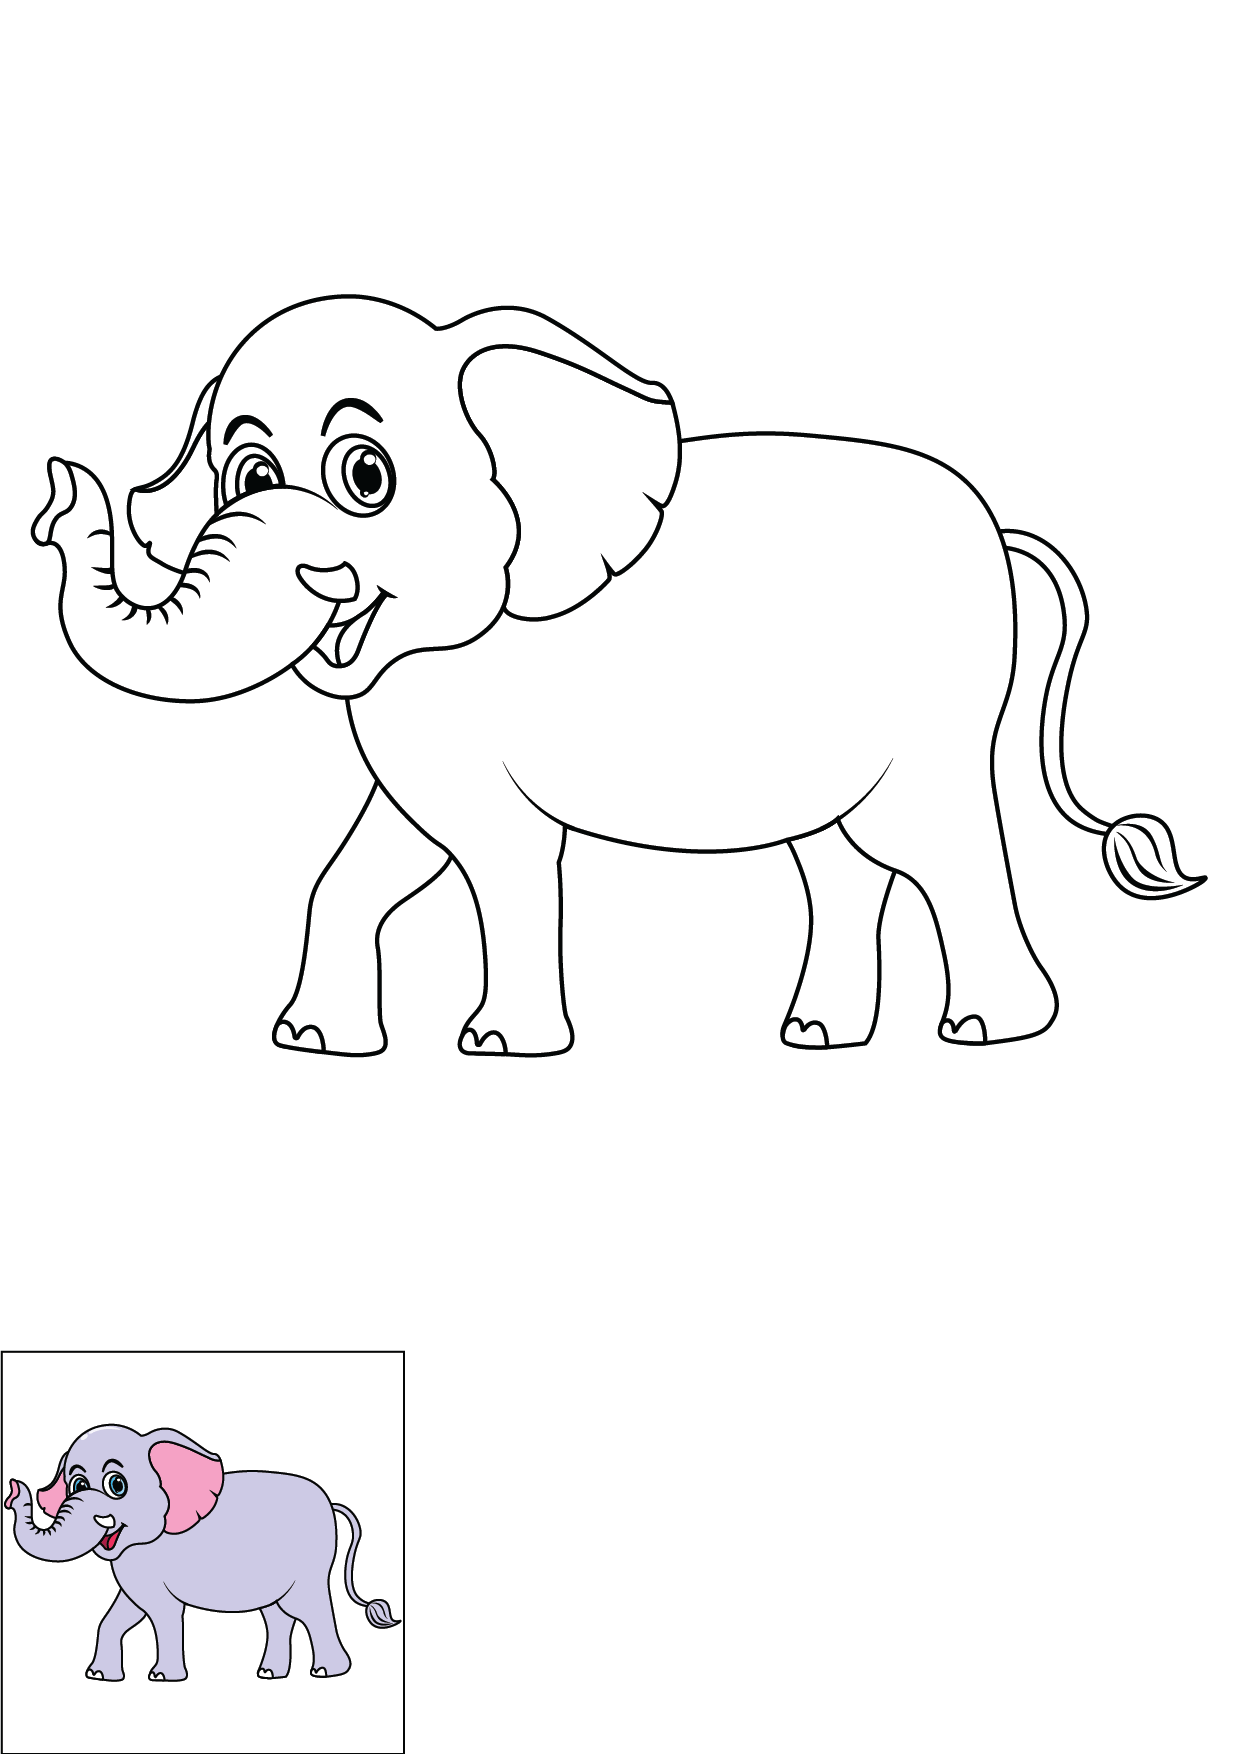 How to Draw An Elephant Step by Step Printable Color